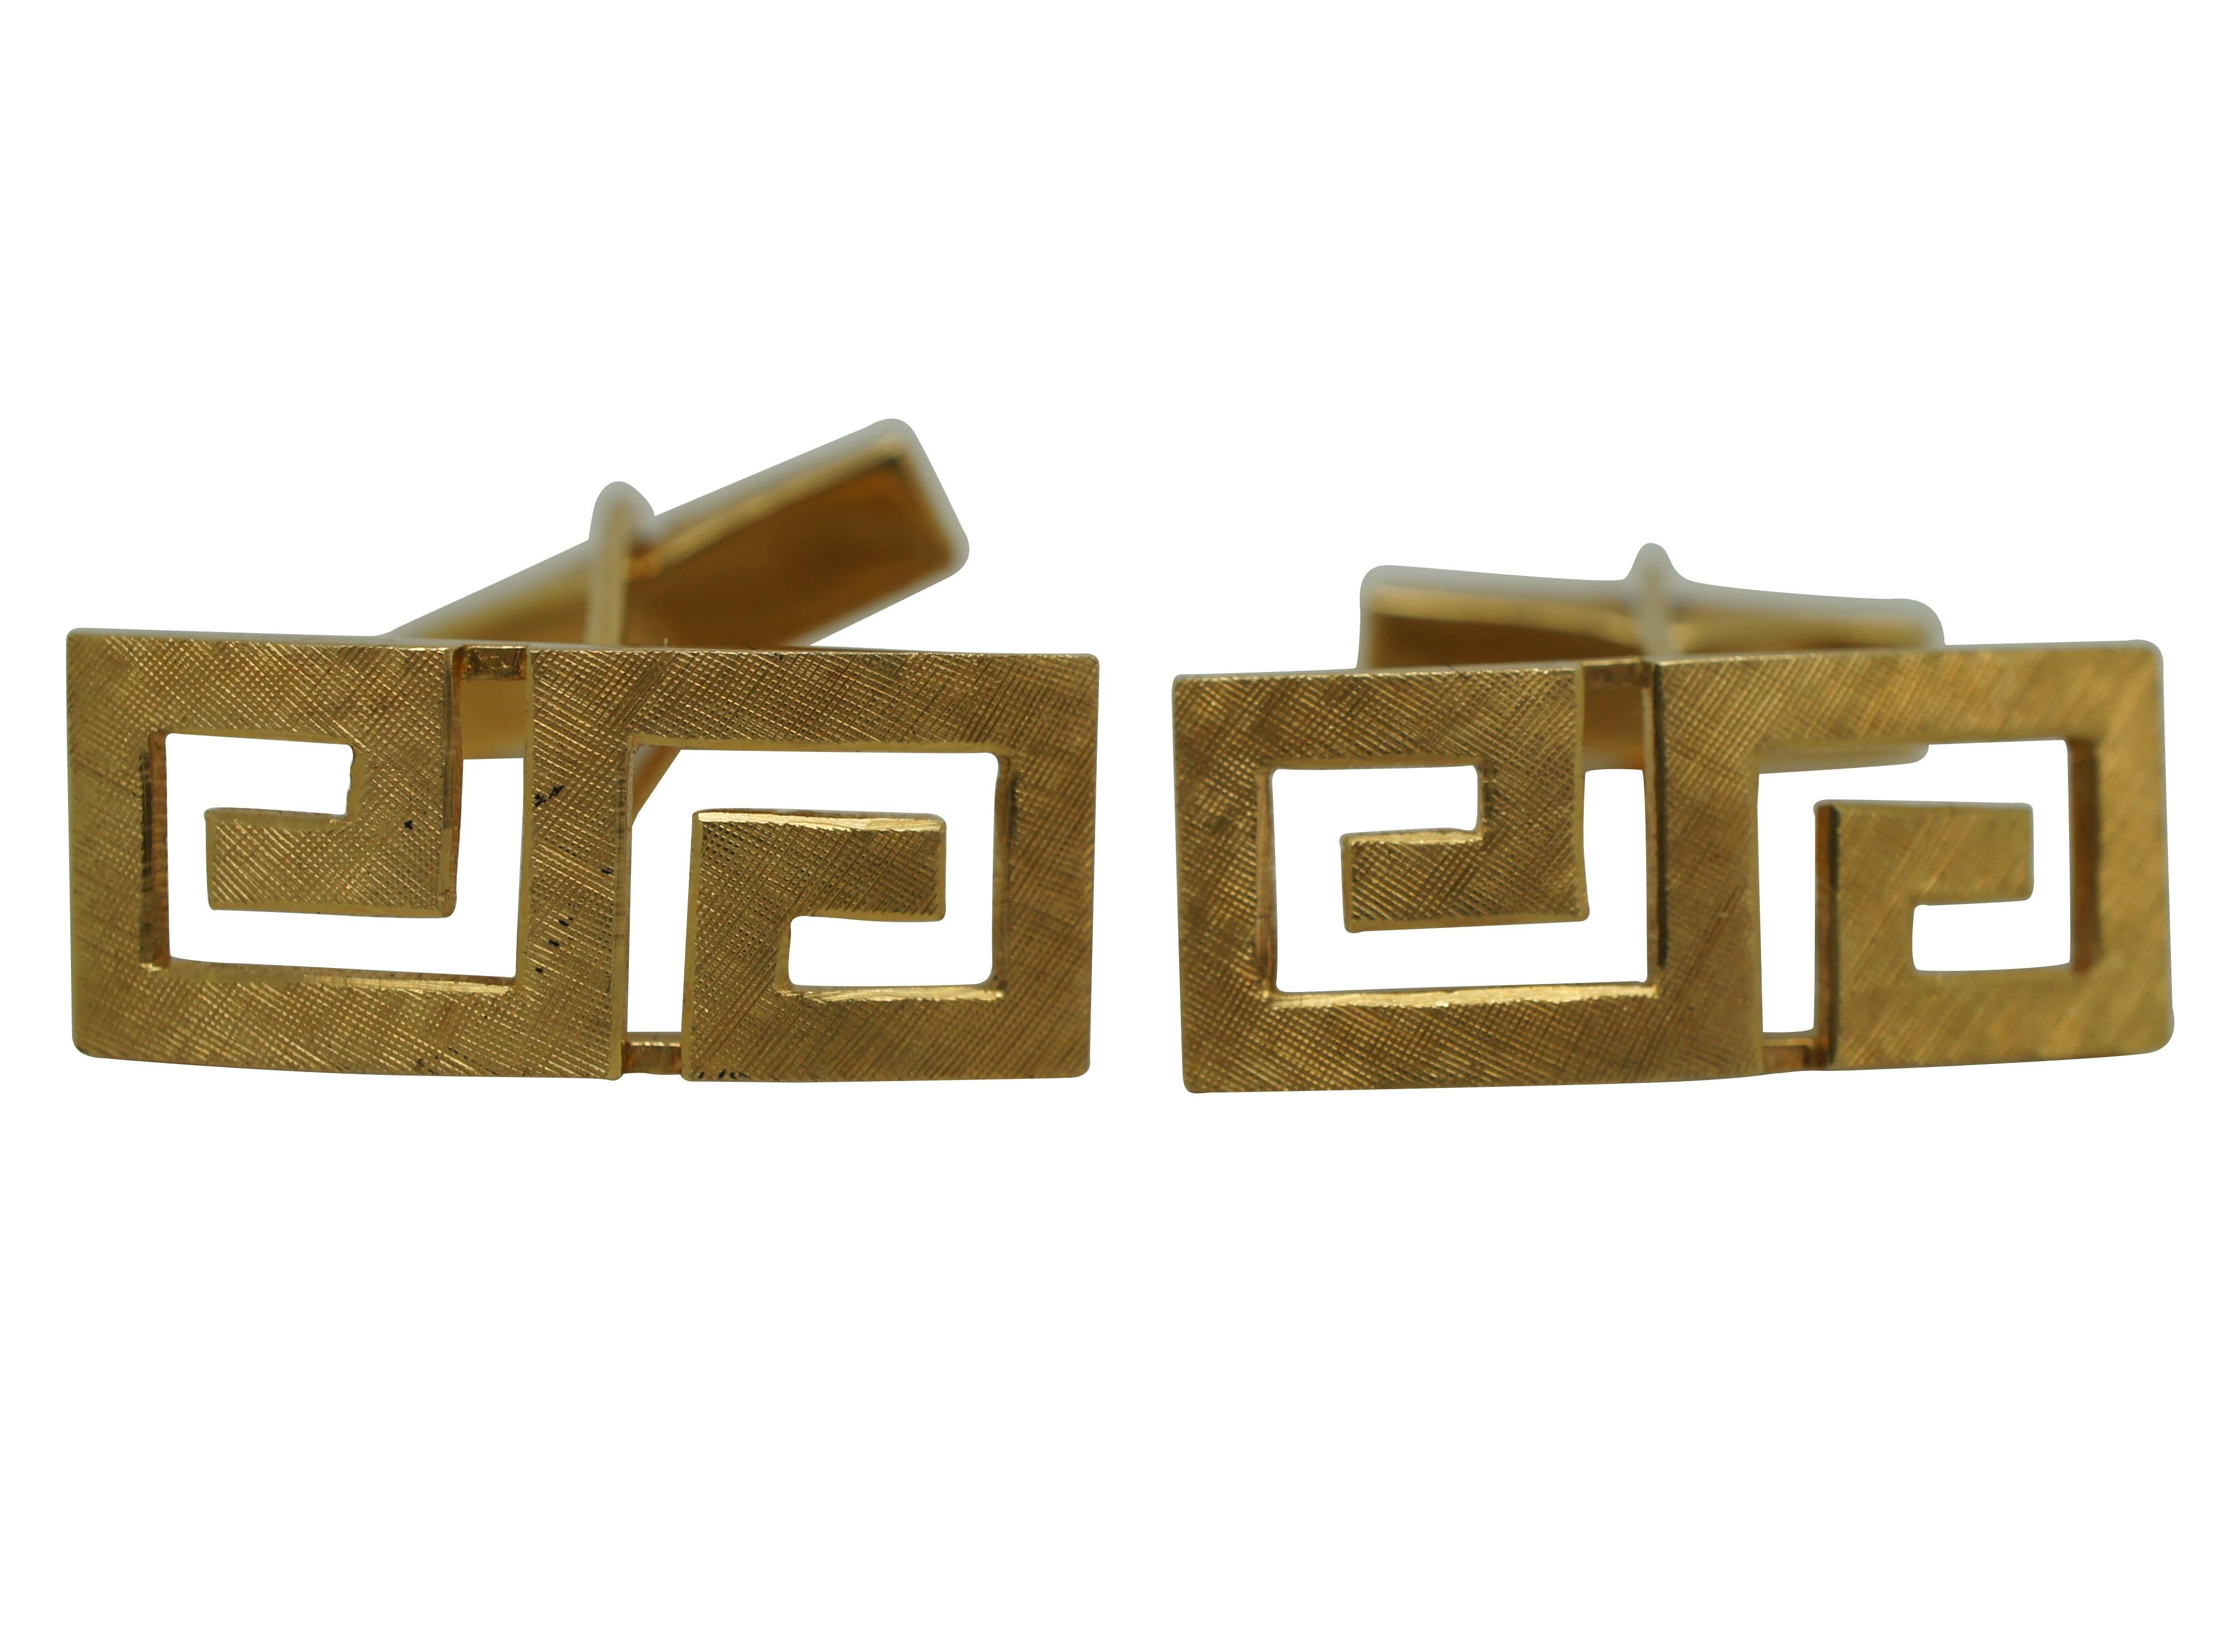 Pair of vintage 18K yellow gold men’s cufflinks in the shape of a Greek Key pattern with cross hatched surface texture.